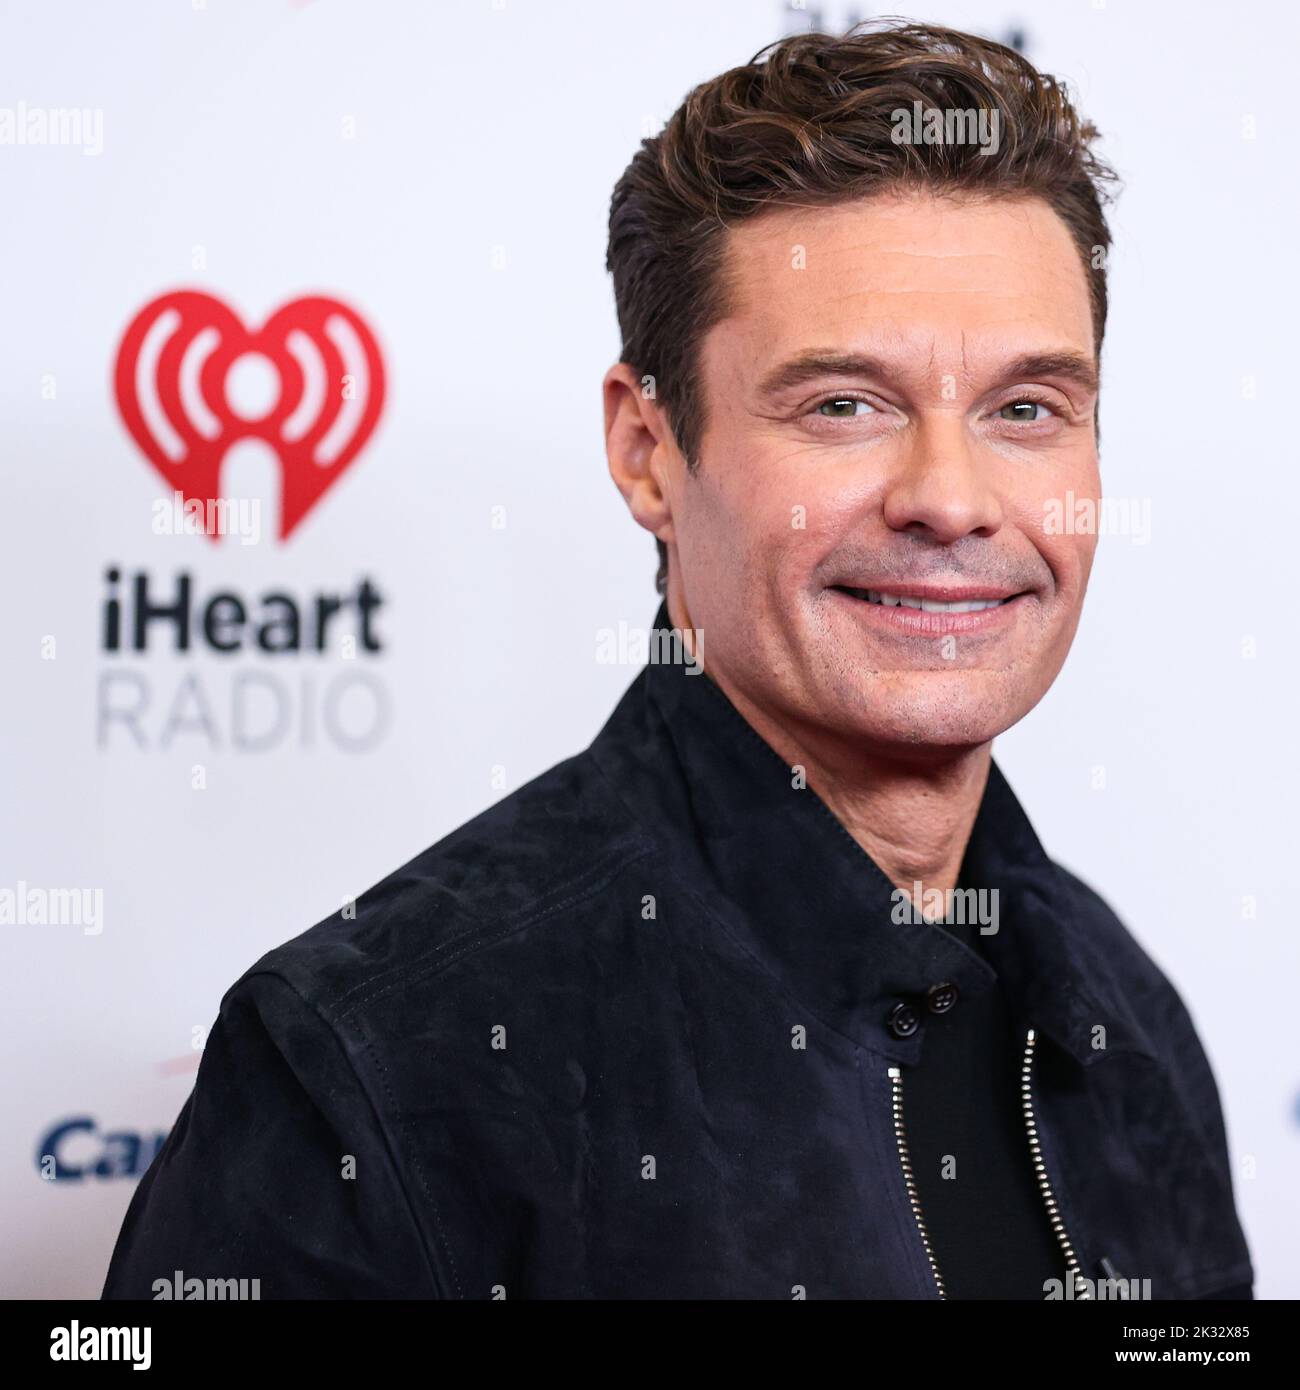 LAS VEGAS, NEVADA, USA - SEPTEMBER 23: Ryan Seacrest poses in the press room at the 2022 iHeartRadio Music Festival - Night 1 held at the T-Mobile Arena on September 23, 2022 in Las Vegas, Nevada, United States. (Photo by Xavier Collin/Image Press Agency) Stock Photo